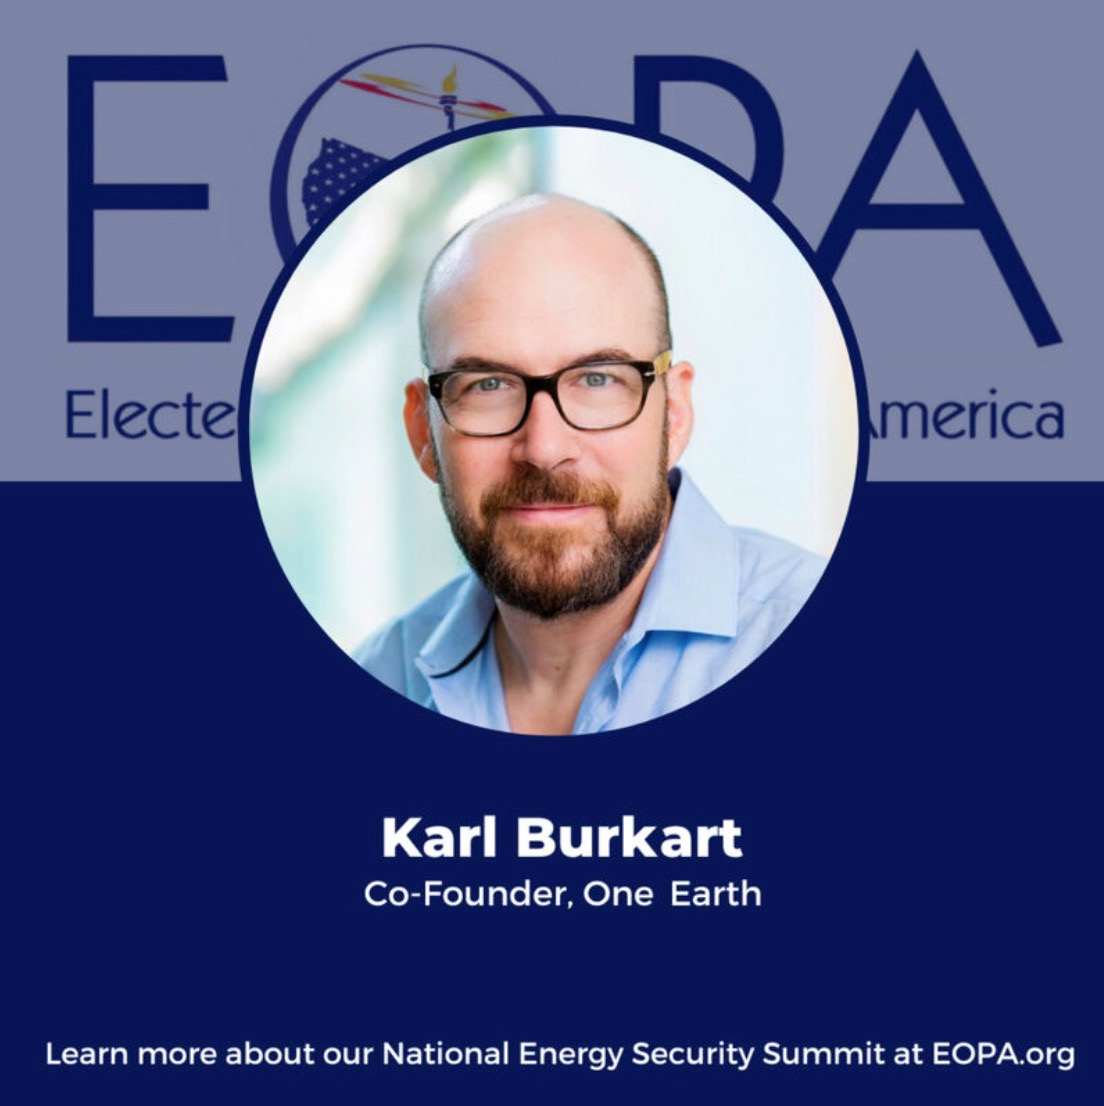 One Earth's Co-founder, Karl Burkart presents at the National Energy Security Summit